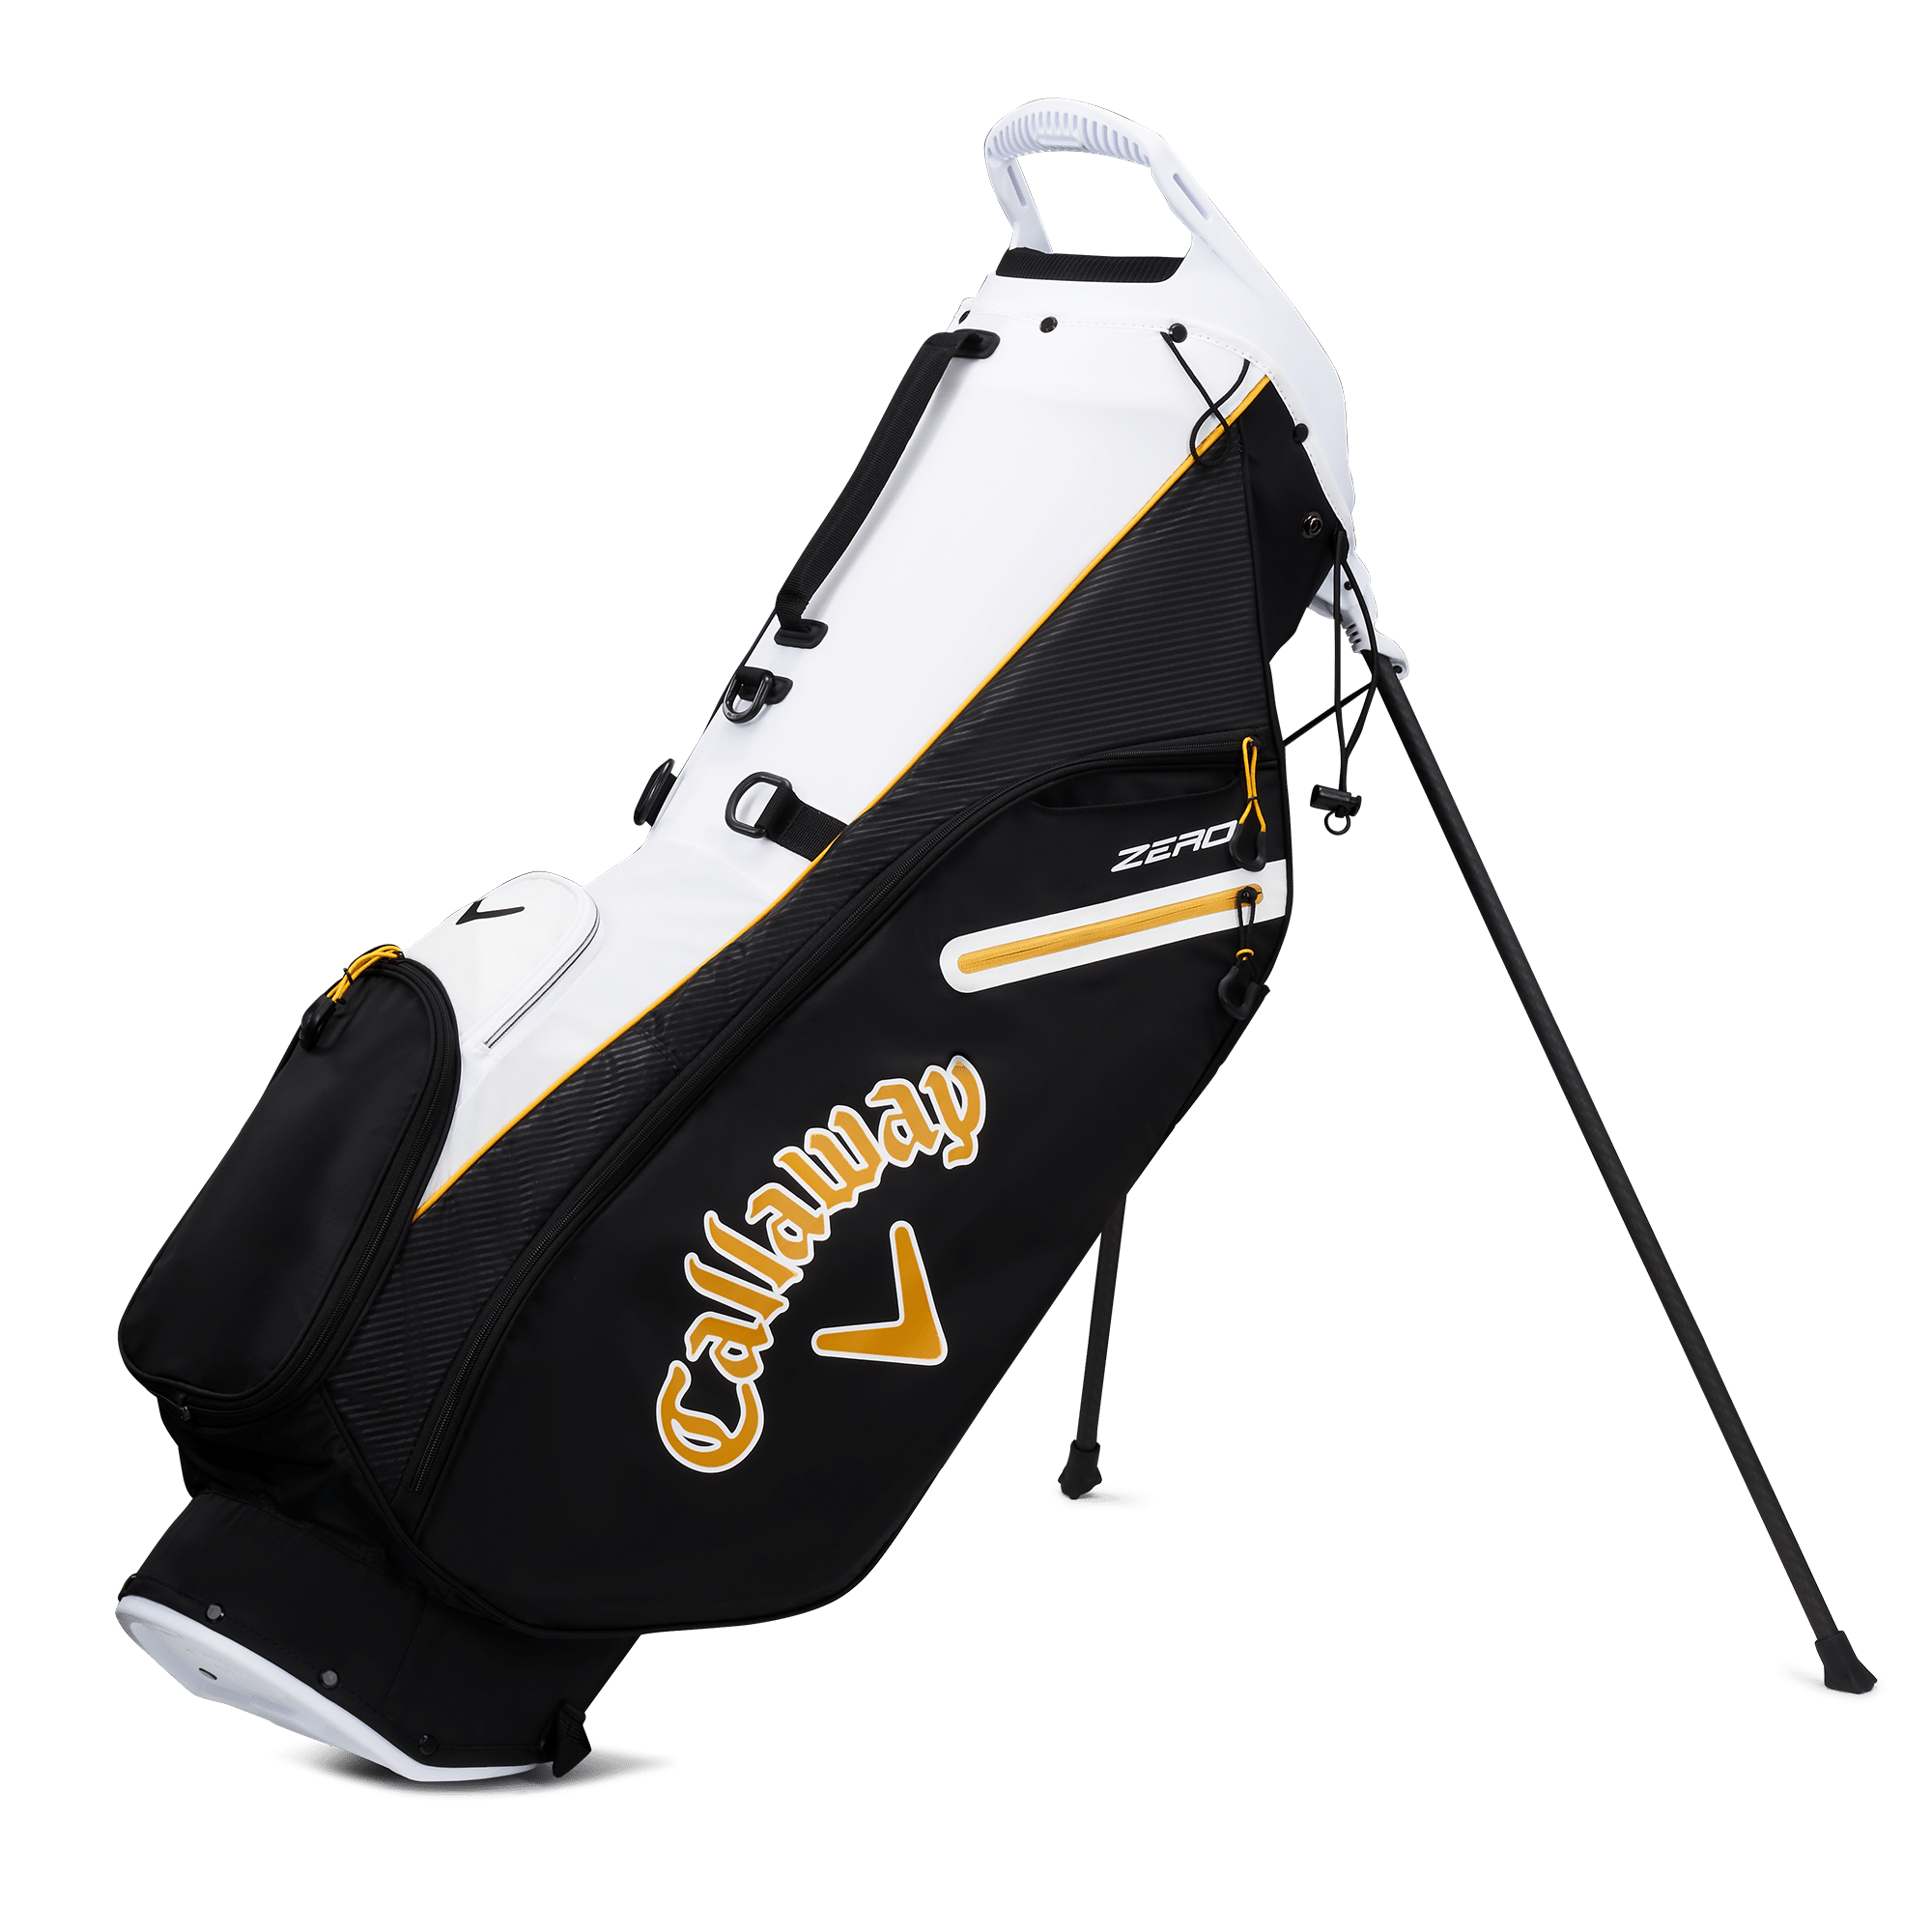 Luxury Golf Bags  Stand Bags Cart Bags  More  VESSEL GOLF